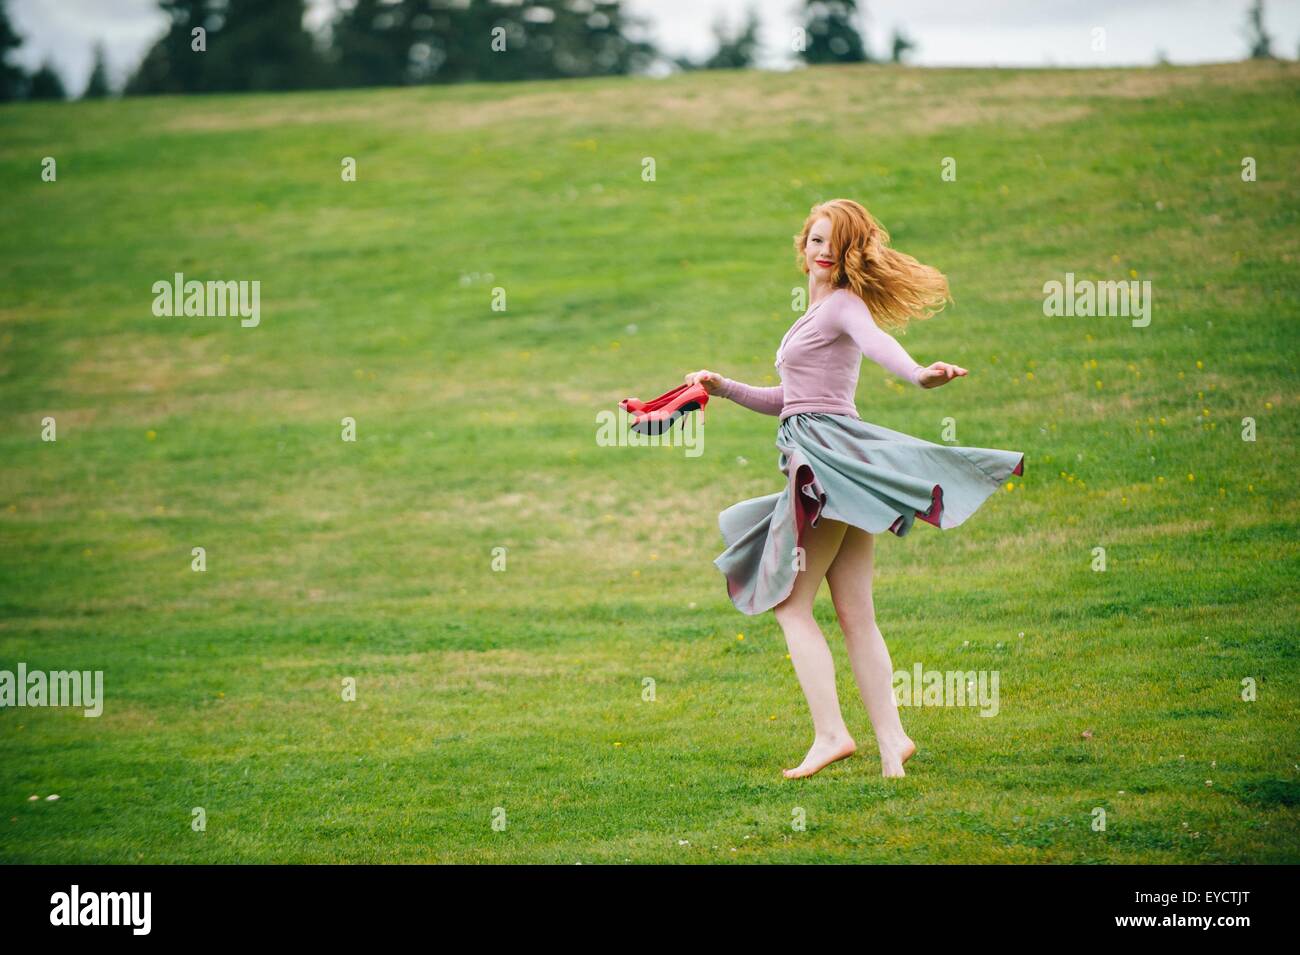 Portrait of young woman dancing in park holding red High heels Banque D'Images